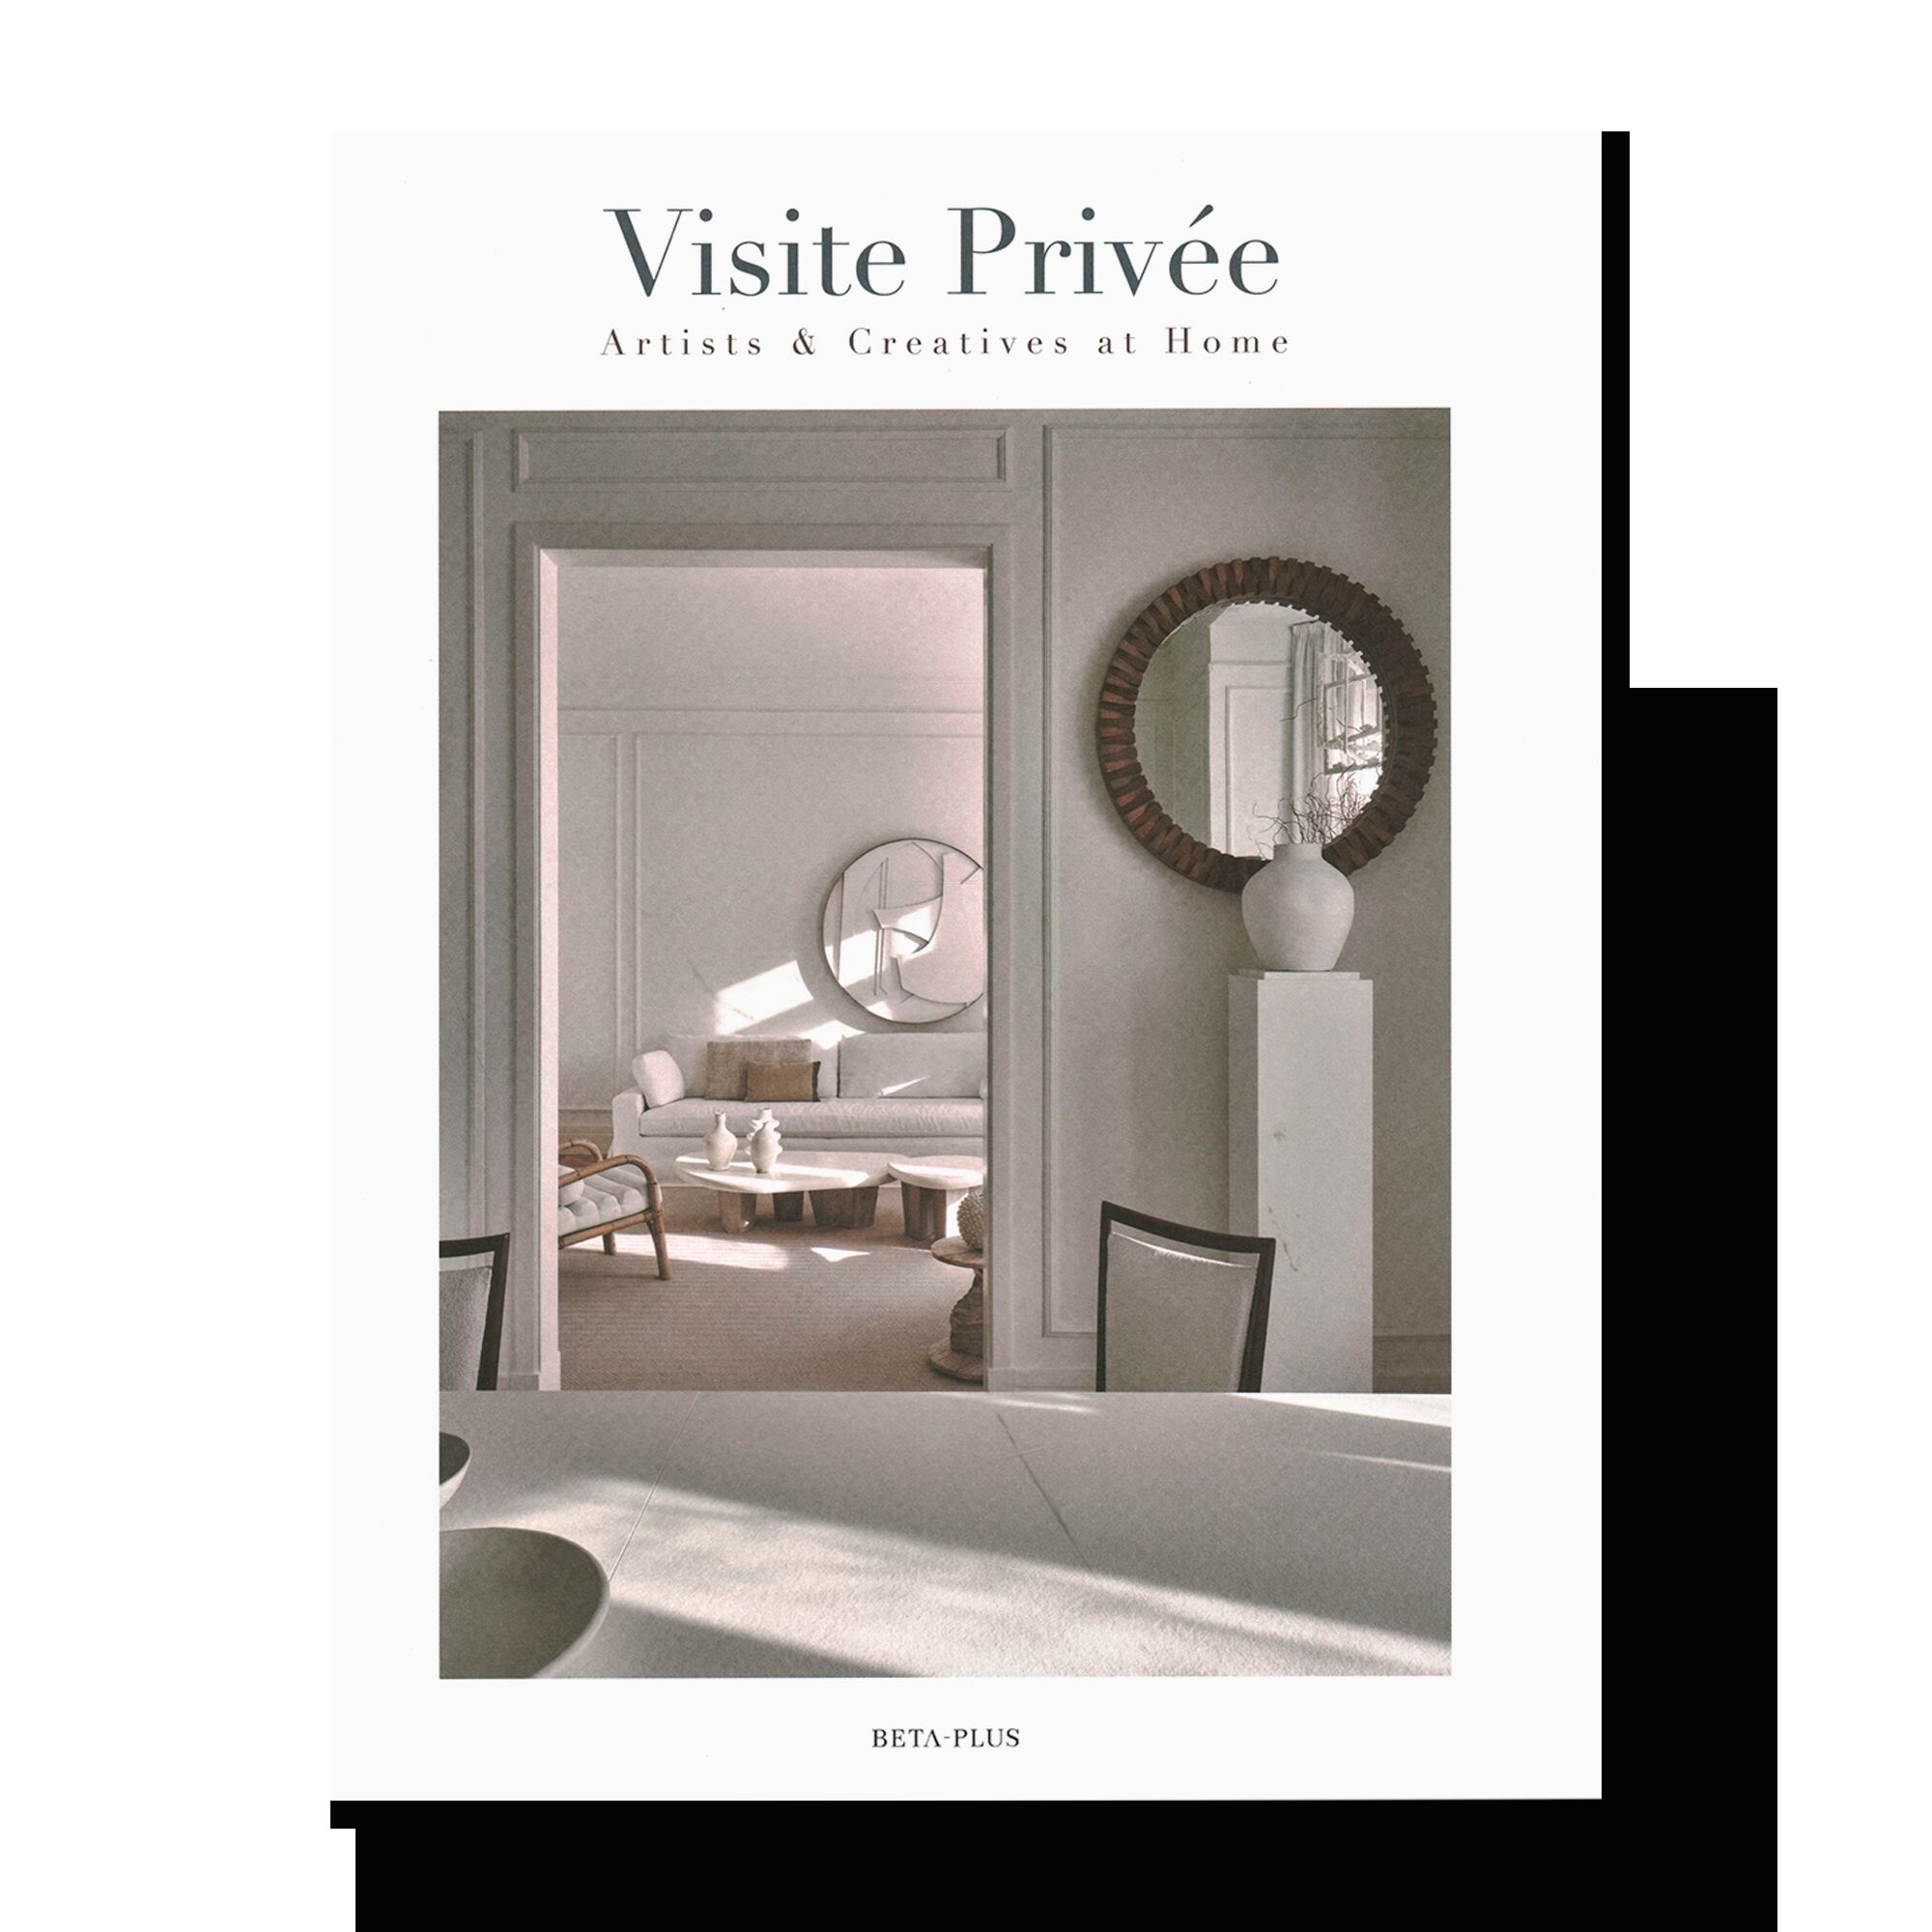 Visite Privee: Artists & Creatives at Home